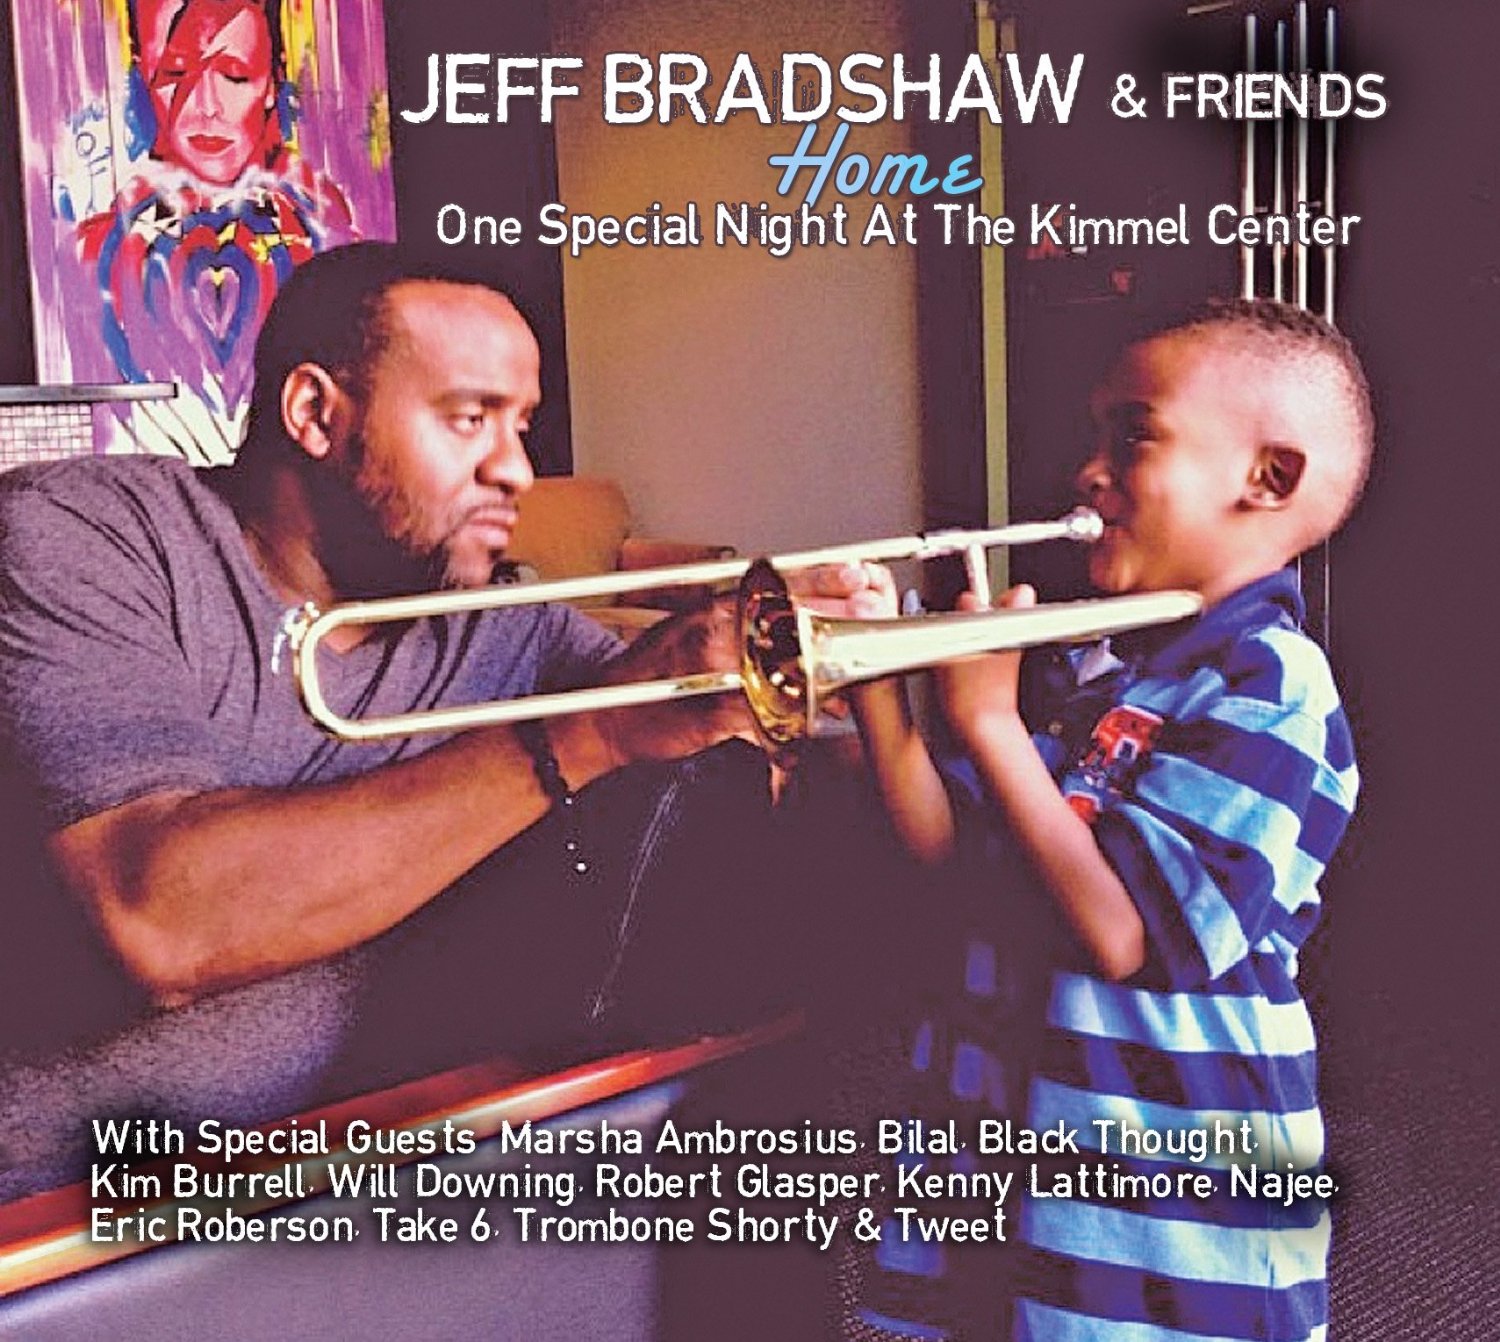 Jeff Bradshaw - Home: One Special Night At The Kimmel Center (2015) [HDTracks FLAC 24bit/44,1kHz]